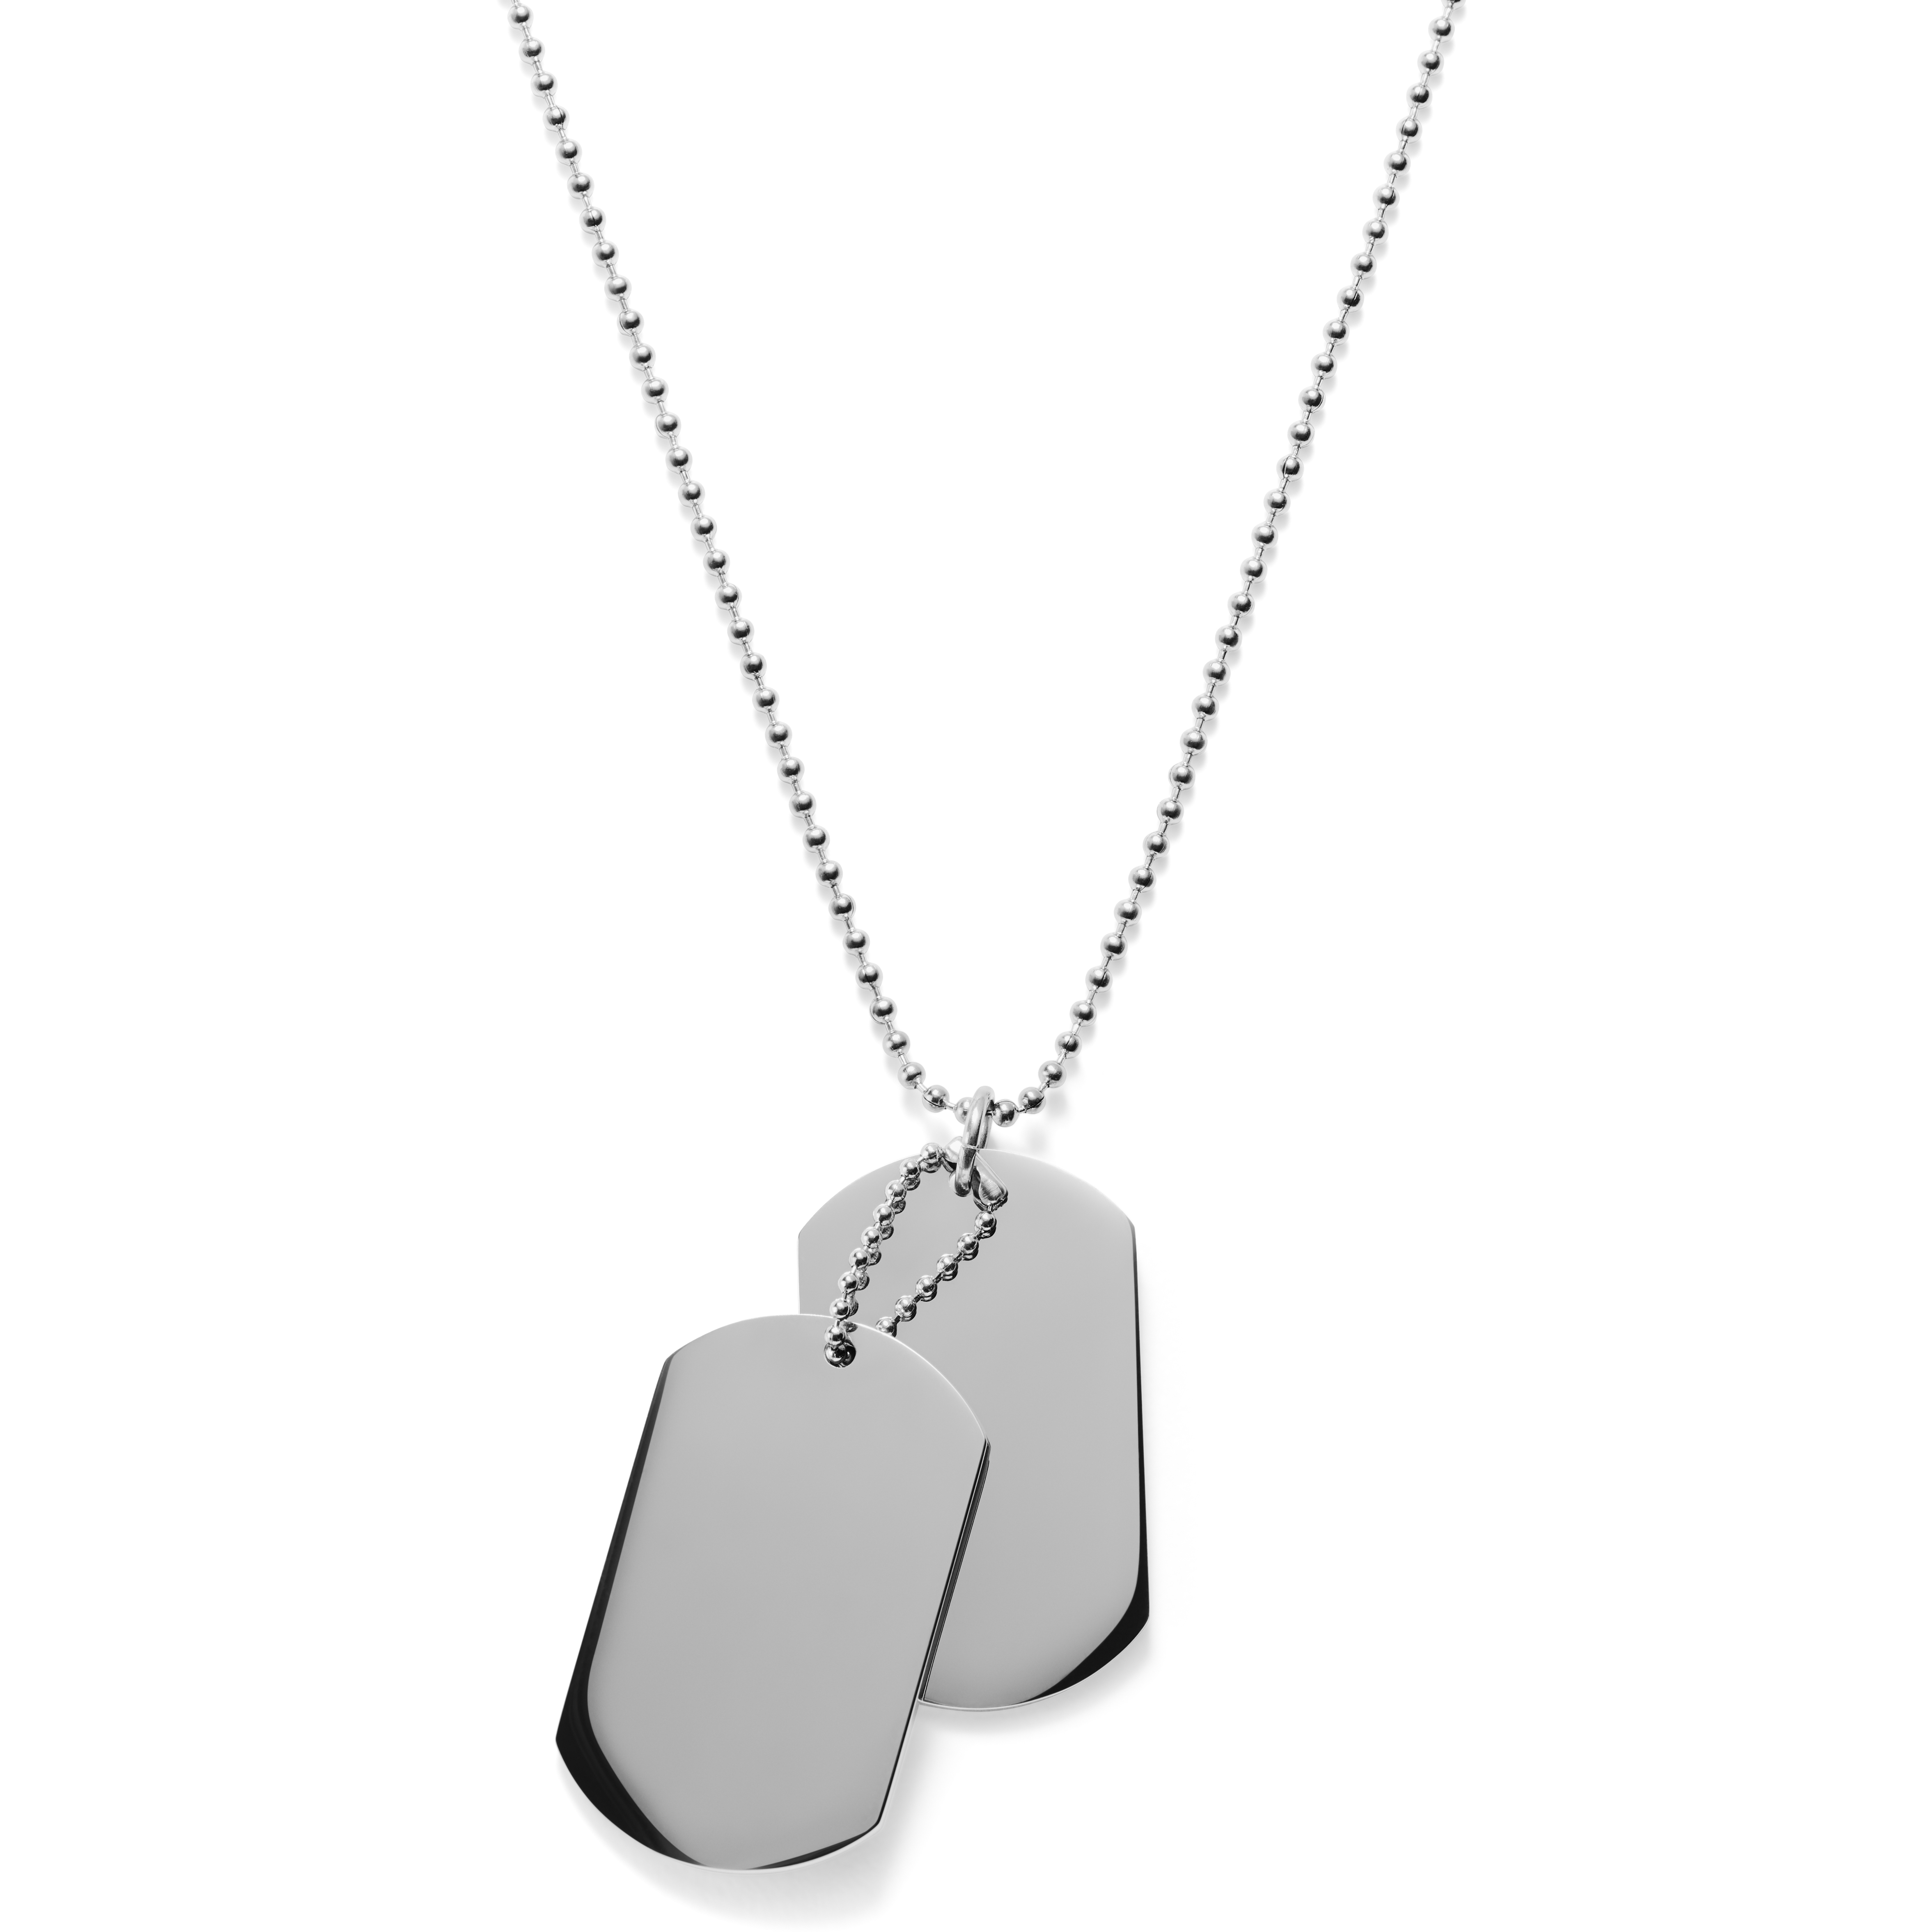 Sublimated dog tags on Silver metal.  Dog tags, Metallic silver, Dog tag  necklace